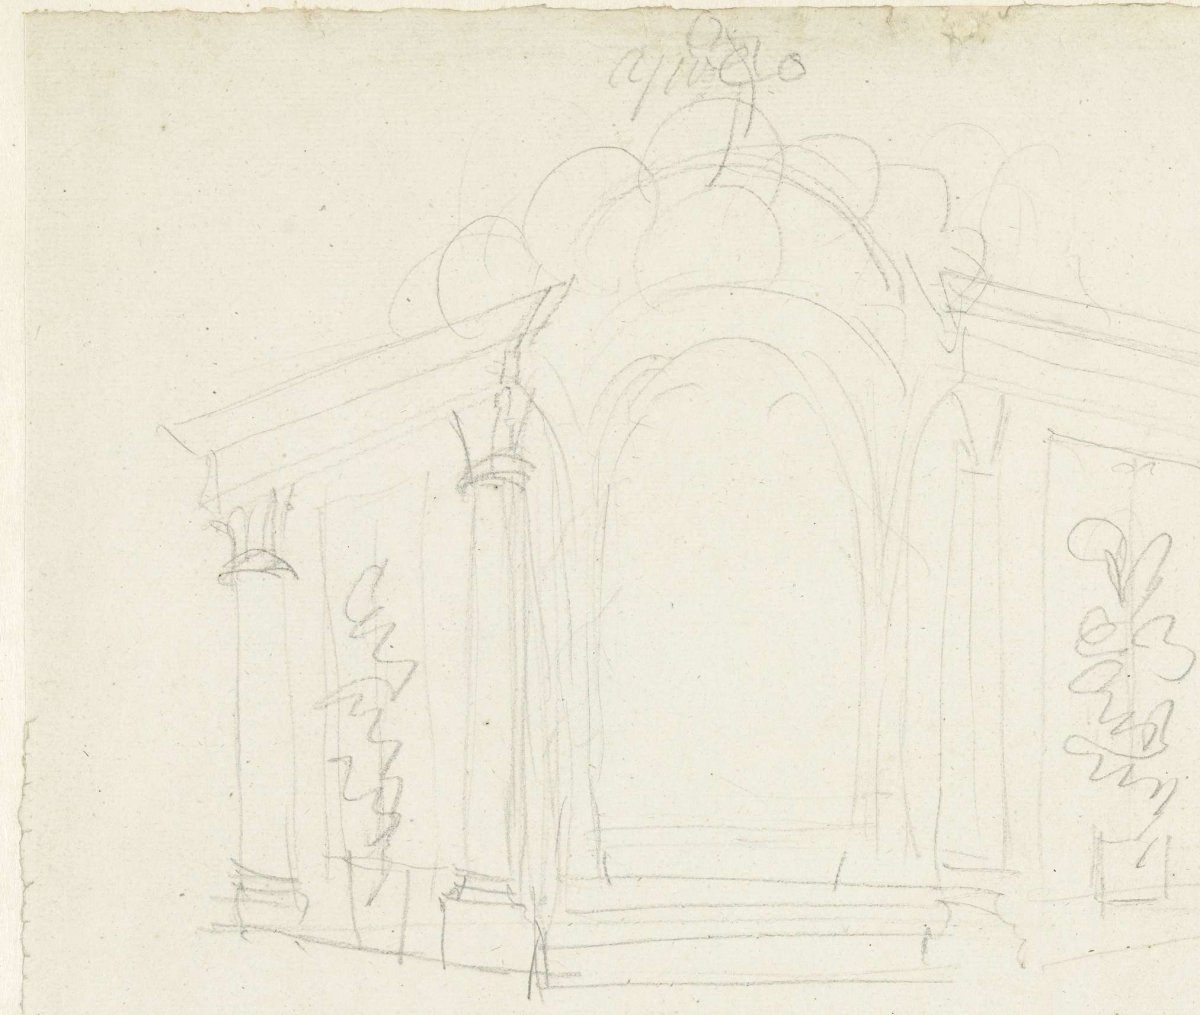 Design for a decoration on the occasion of the Alliance with France, June 19, 1795, Jan Bulthuis, 1795